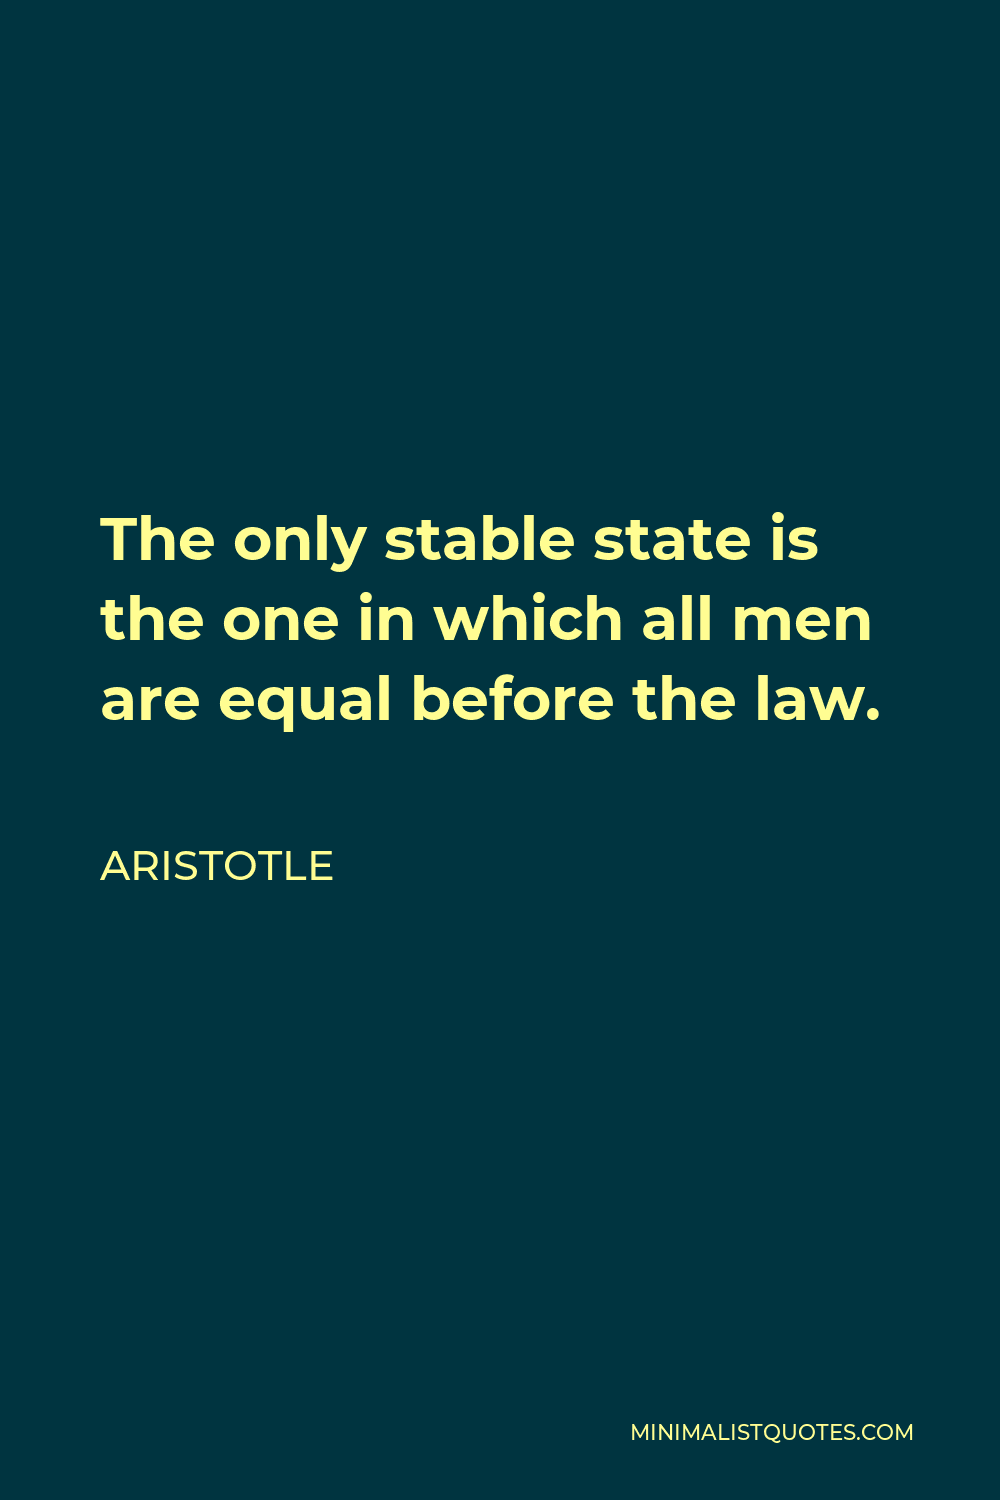 Aristotle Quote - The only stable state is the one in which all men are equal before the law.